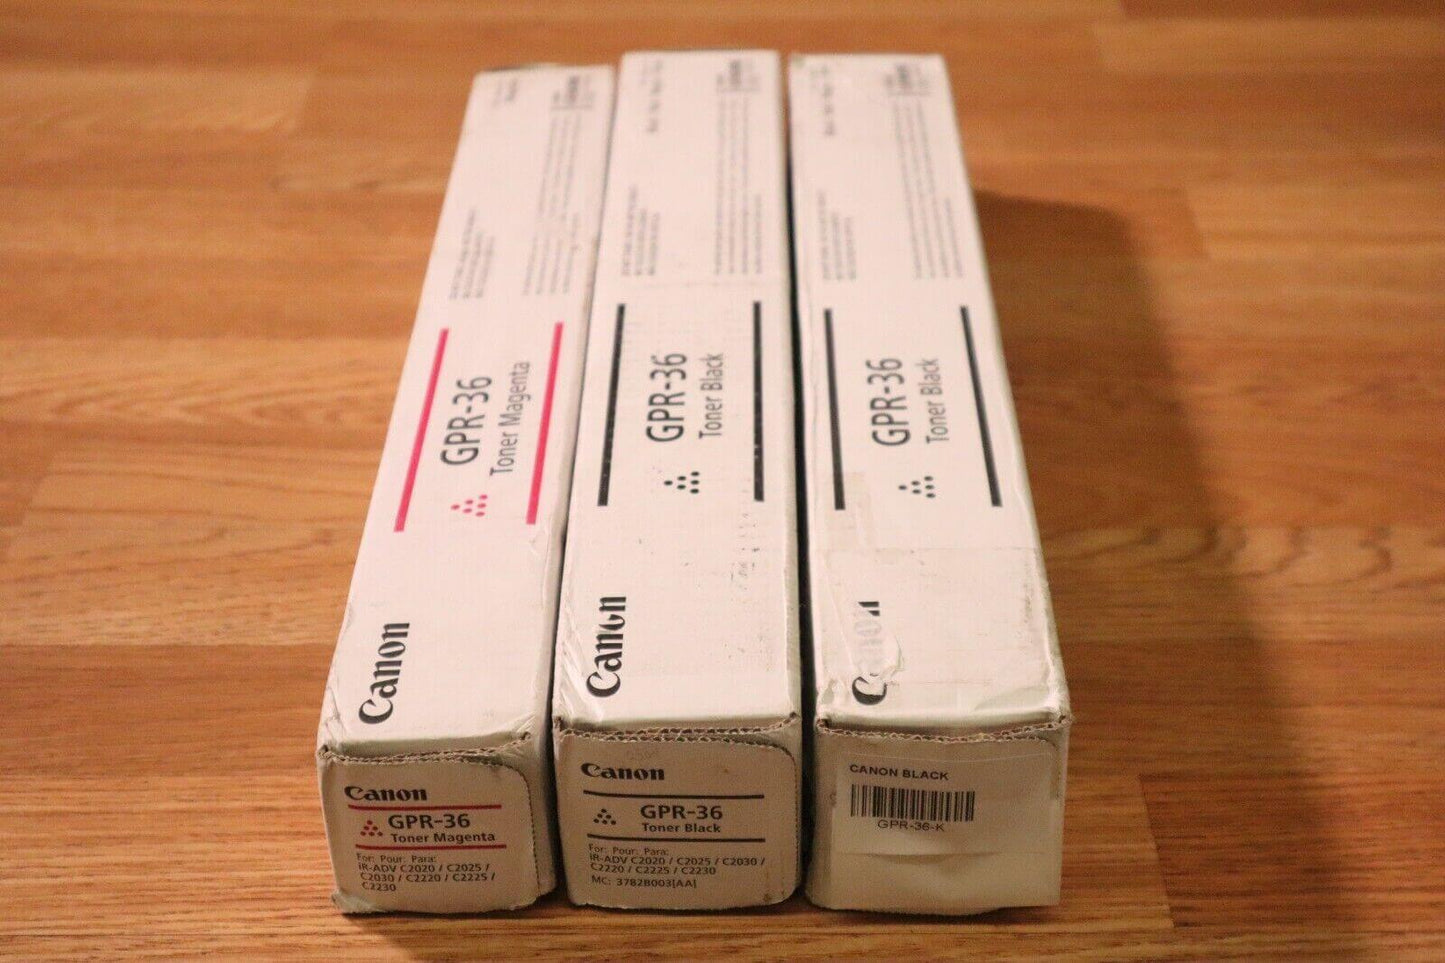 Lot of 3 Canon GPR-36  MKK Toner For iR C2020/ C2025/ C2030/ C2220/ C2225/ C2230 - copier-clearance-center